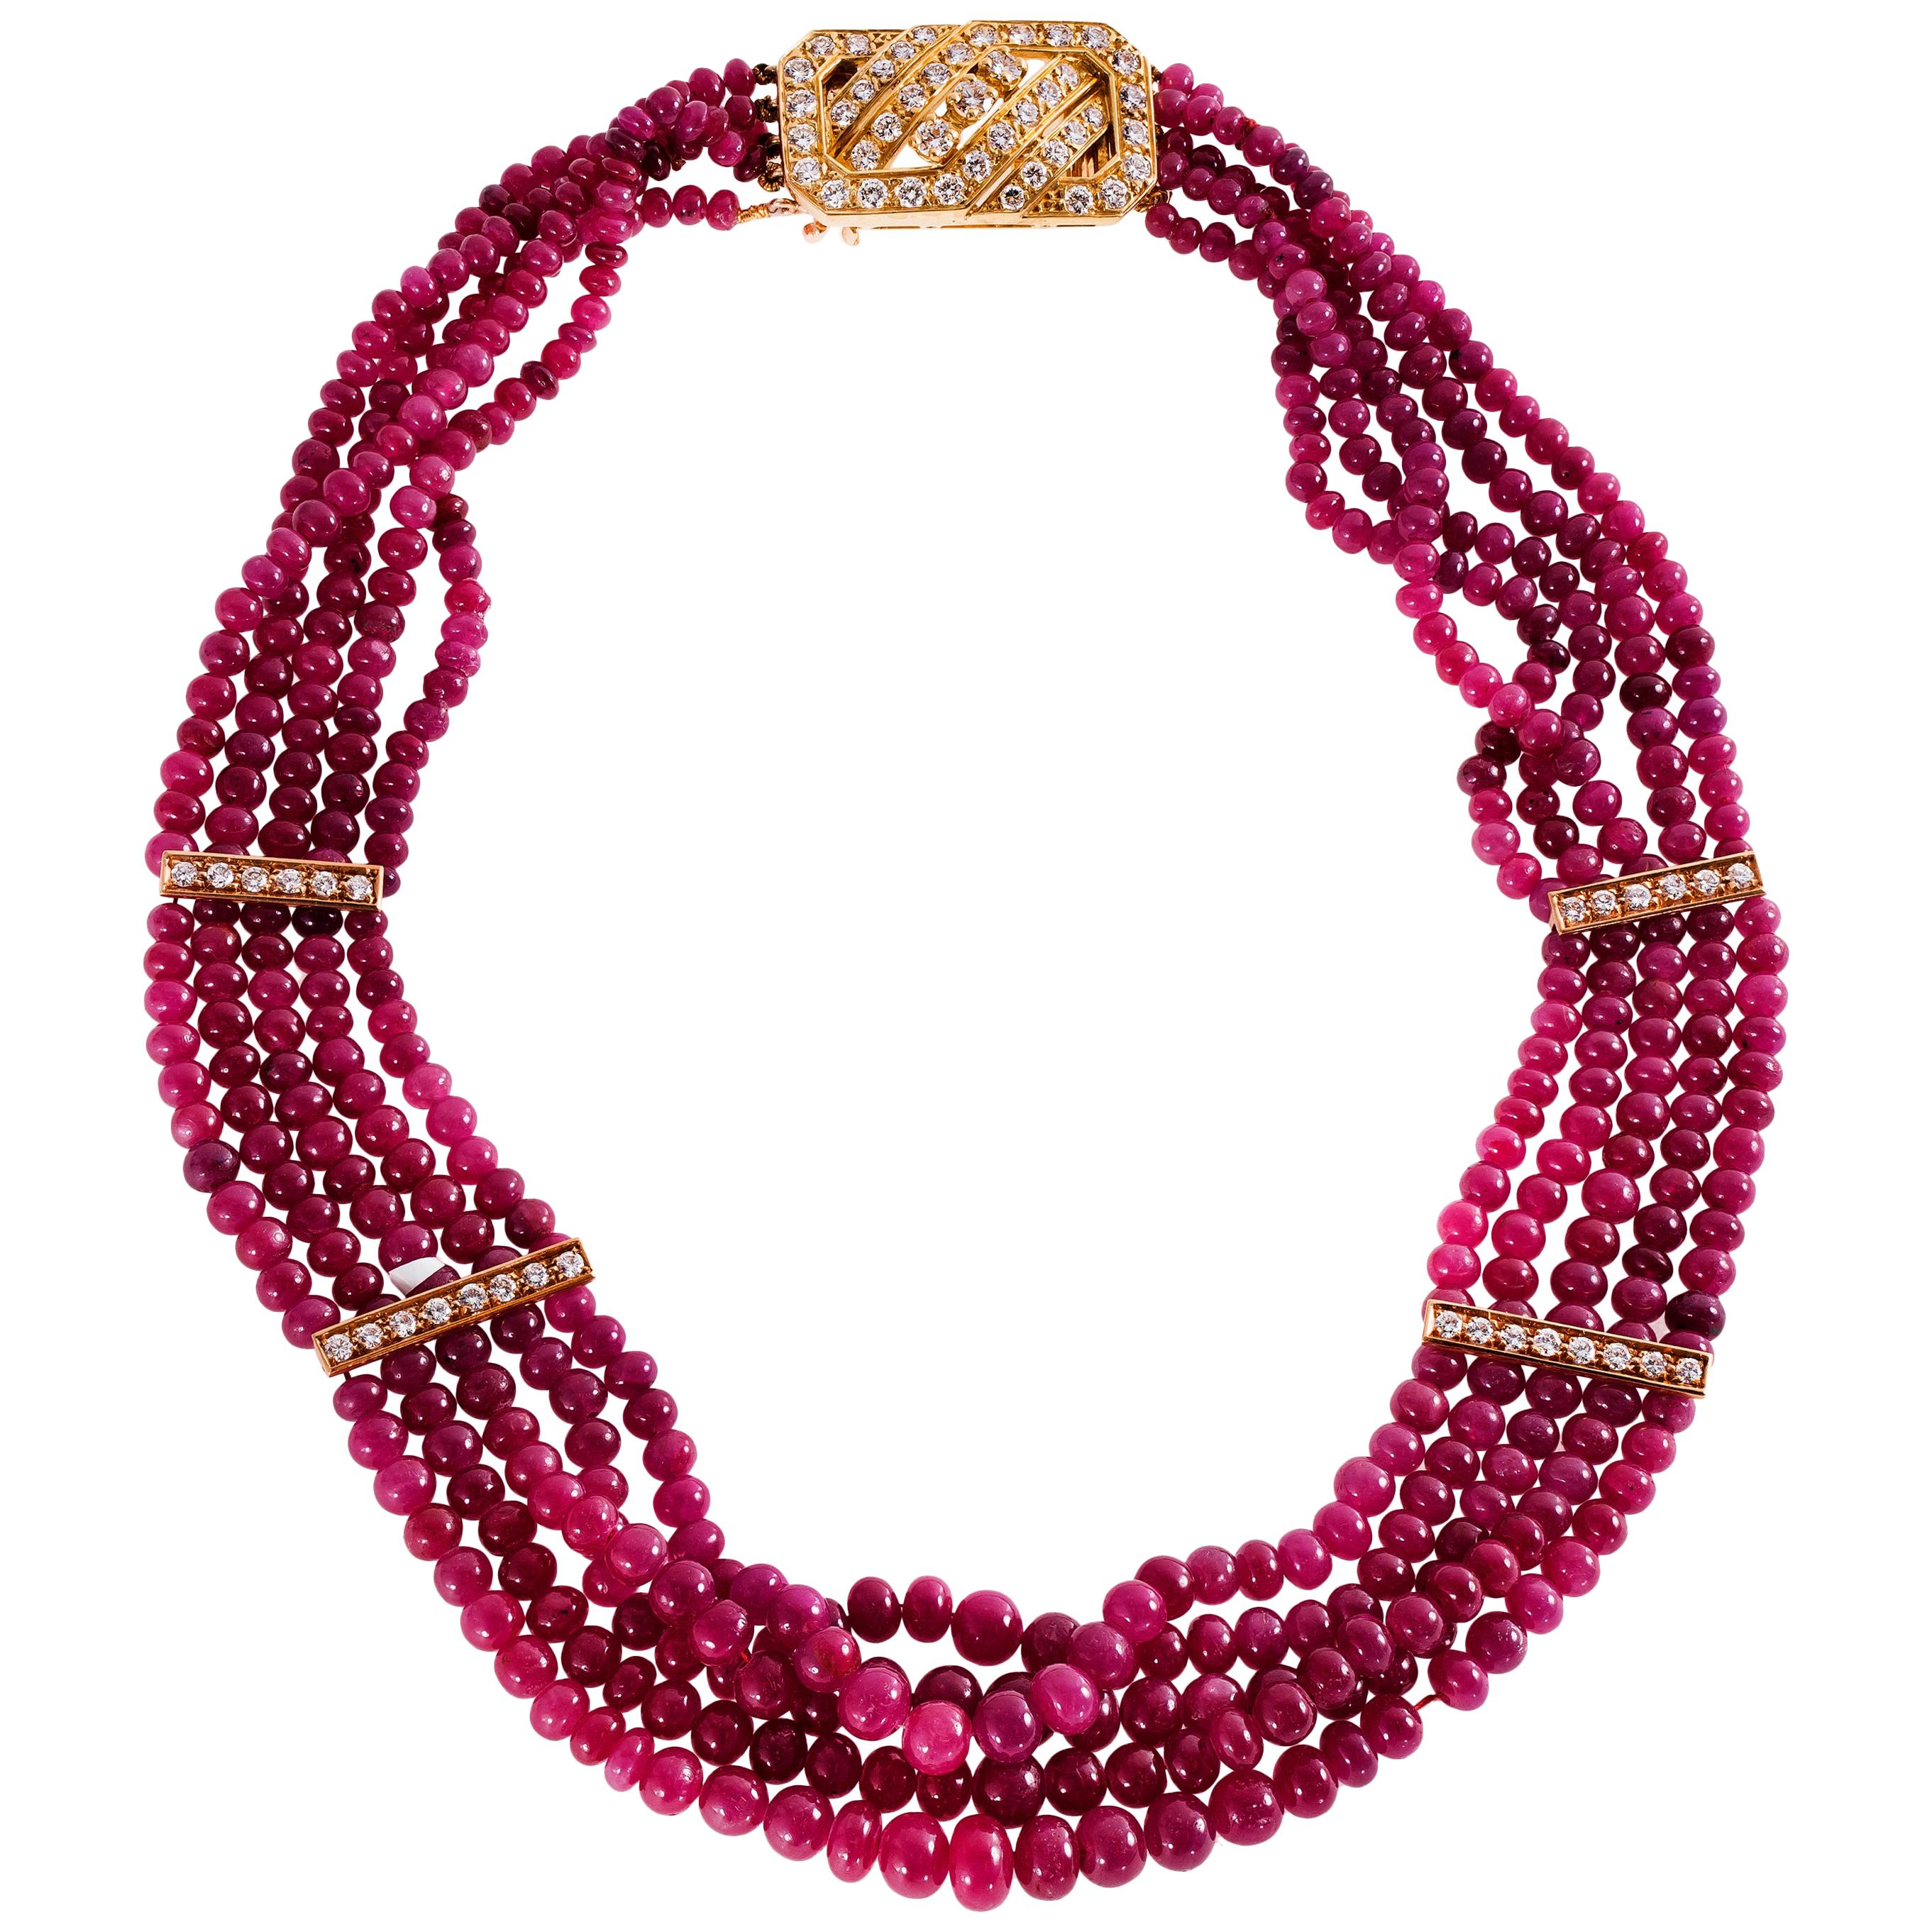 Van Cleef & Arpels Ruby Bead Necklace with 18ky Gold and 3.00 Carat of Diamonds